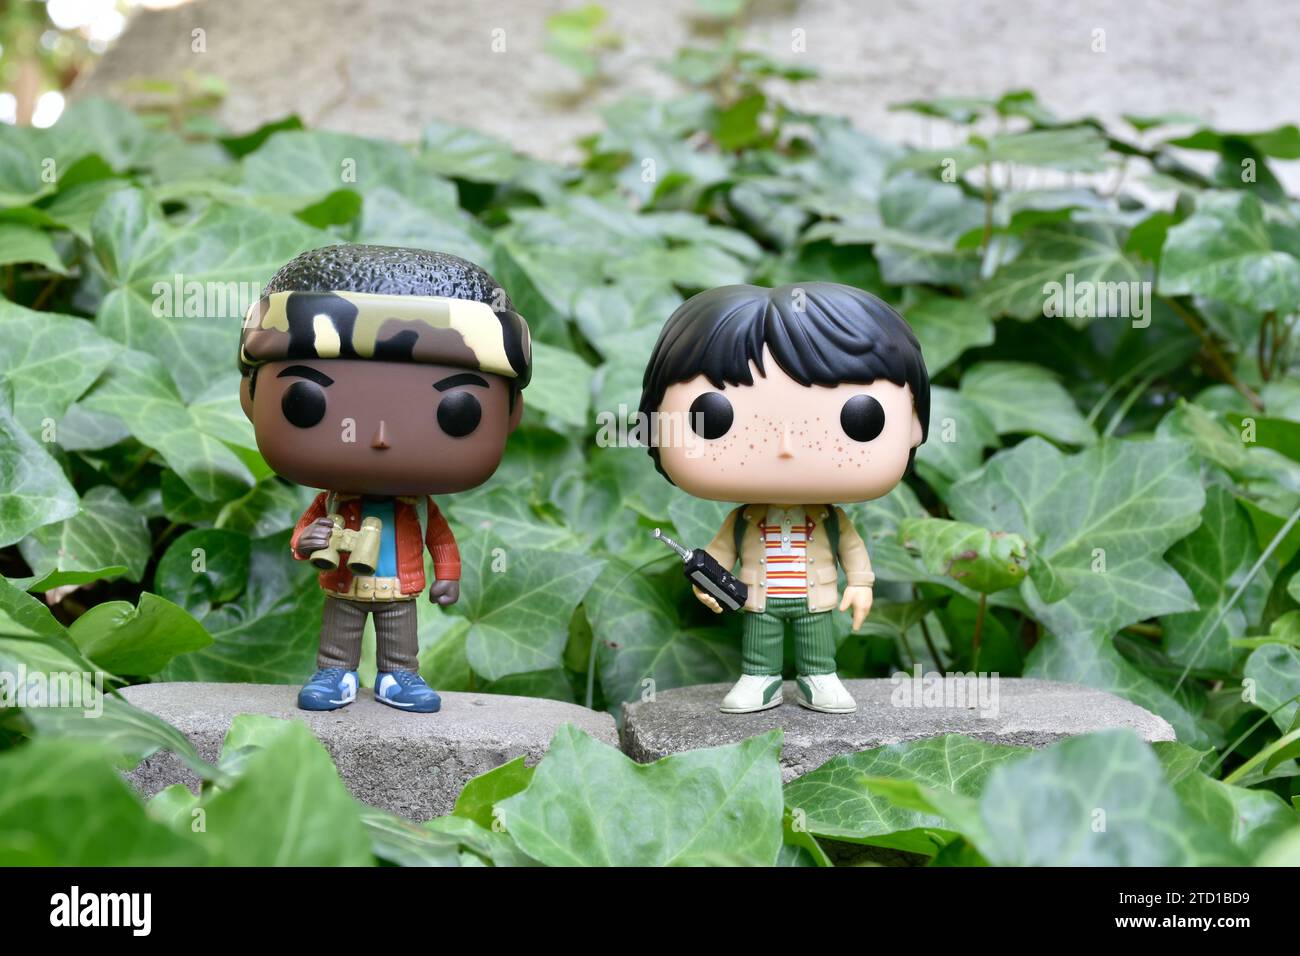 Funko Pop action figures of Lucas and Mike from Netflix TV series Stranger Things. Green ivy plant leaves, abandoned garden, adventures, friendship. Stock Photo